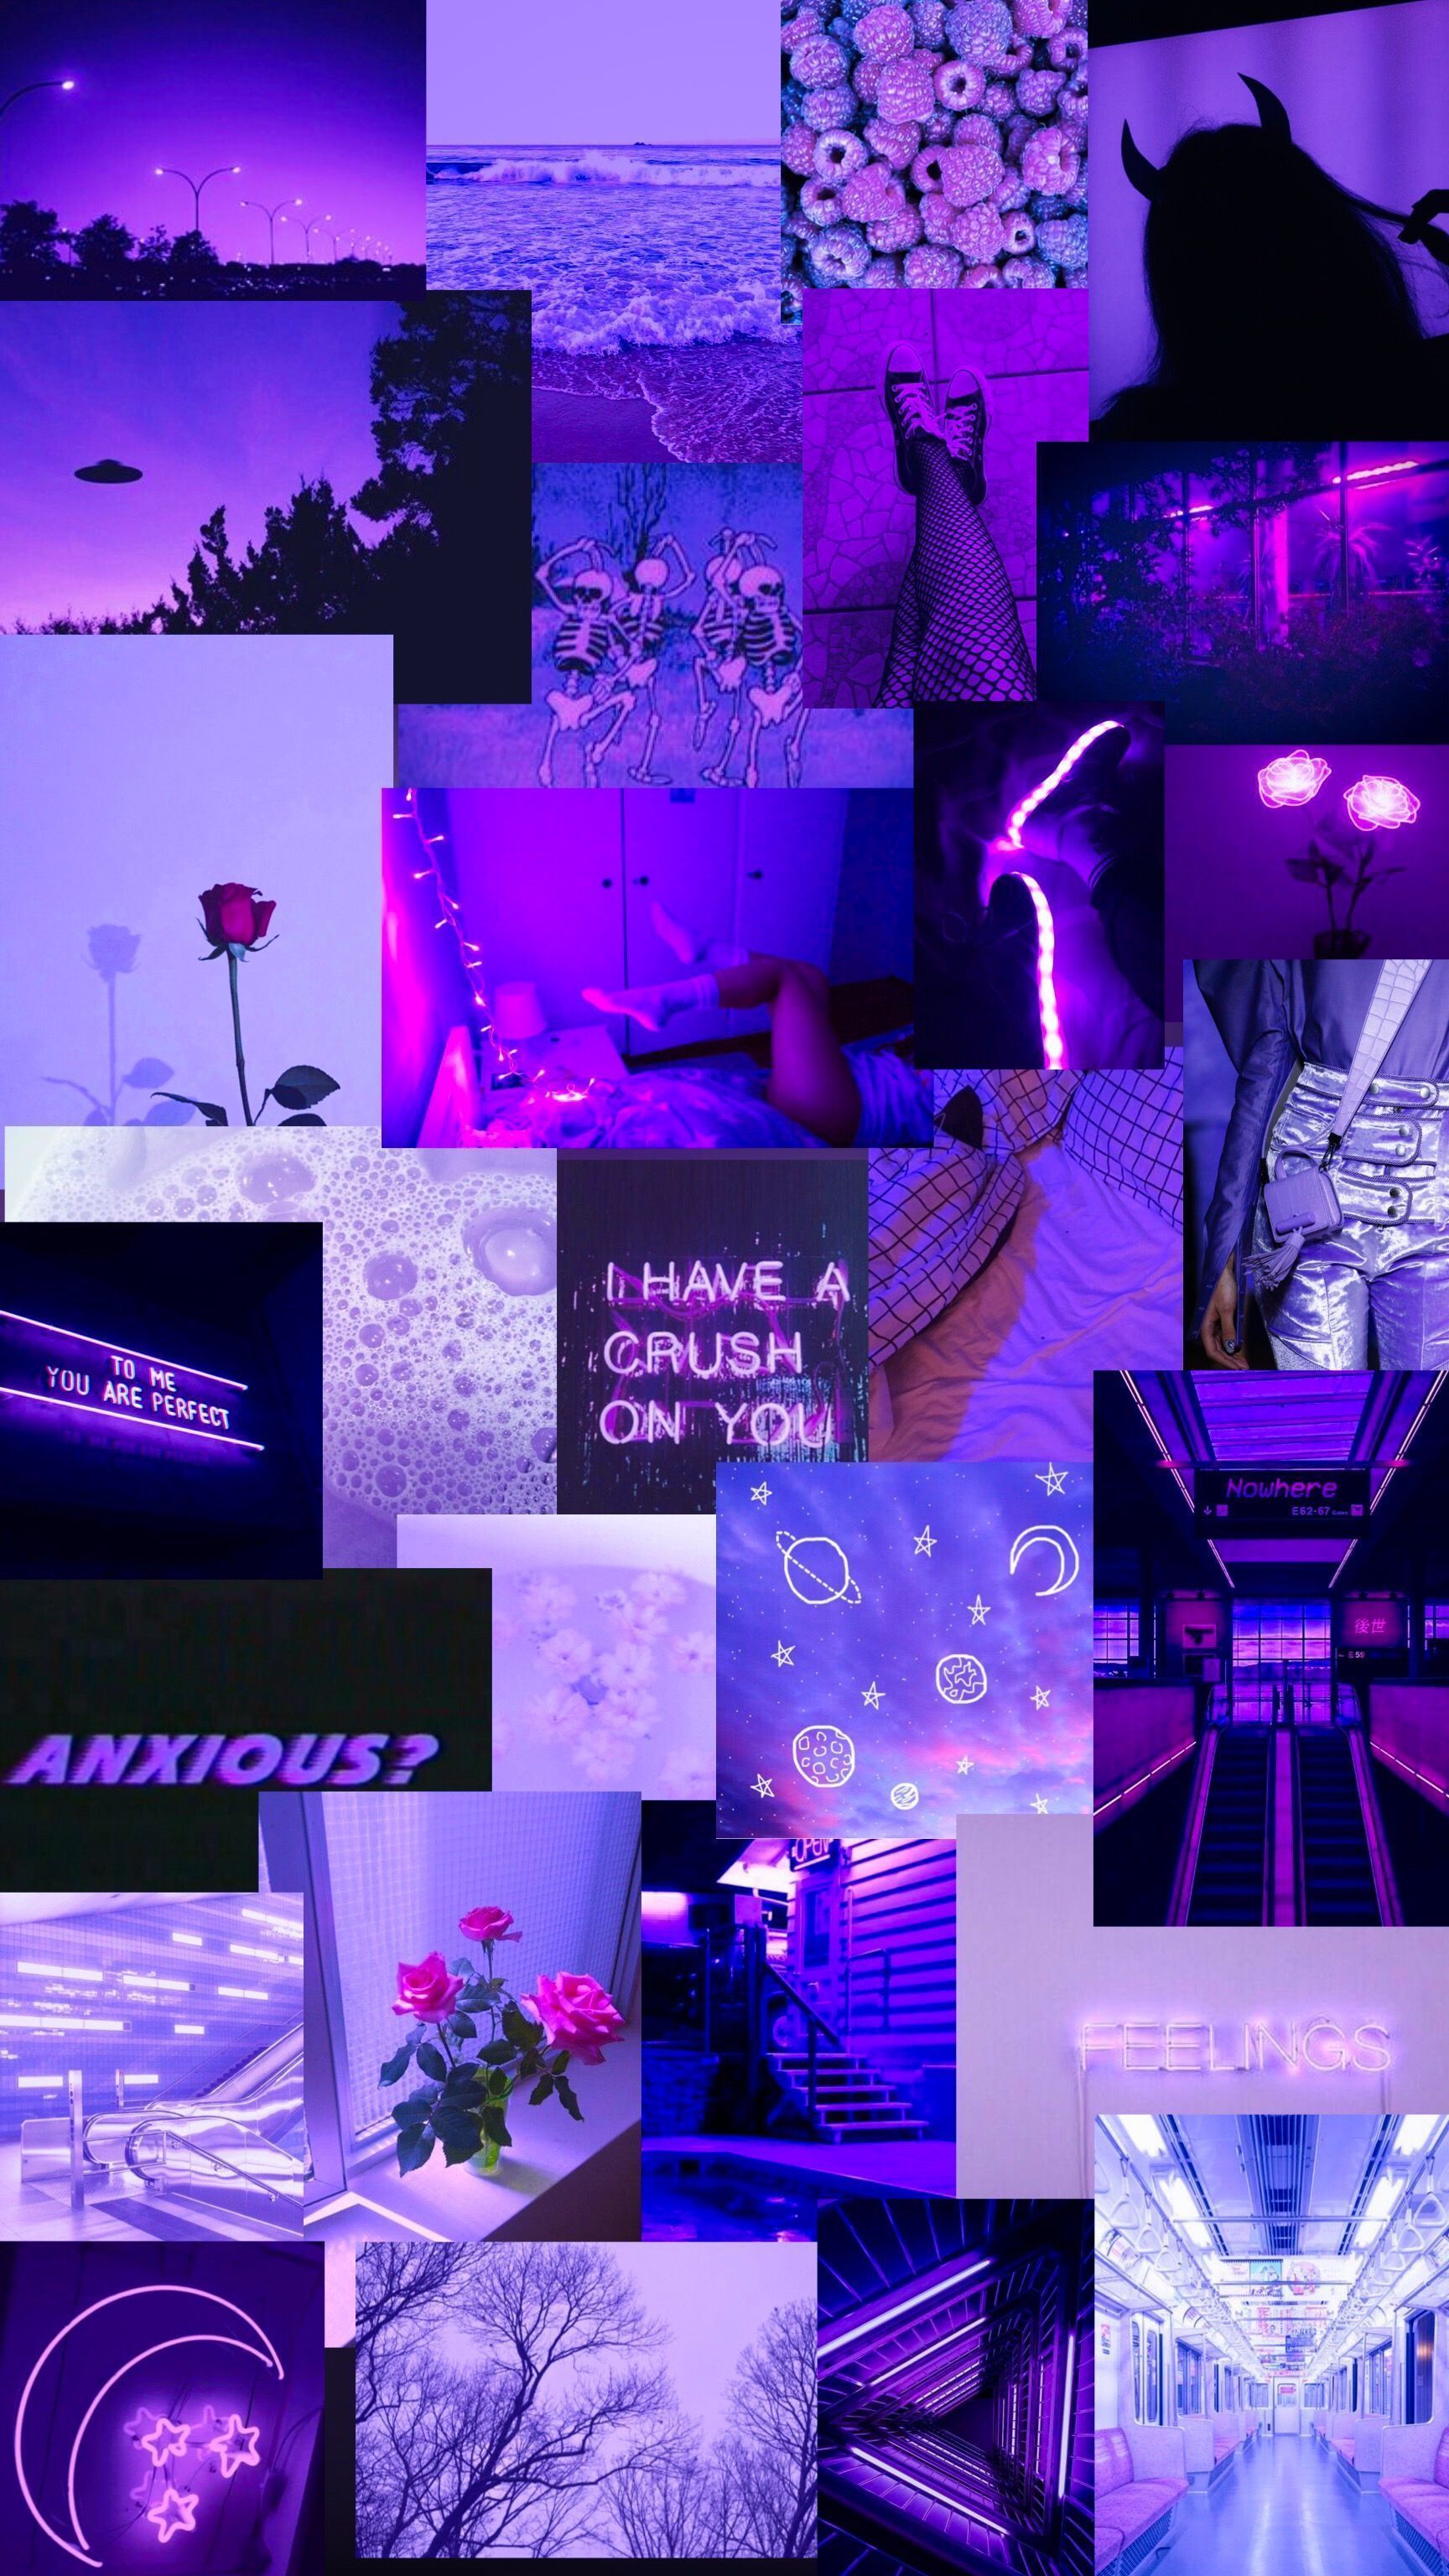 Purple Aesthetic Collage Wallpaper Laptop - Entries Variety